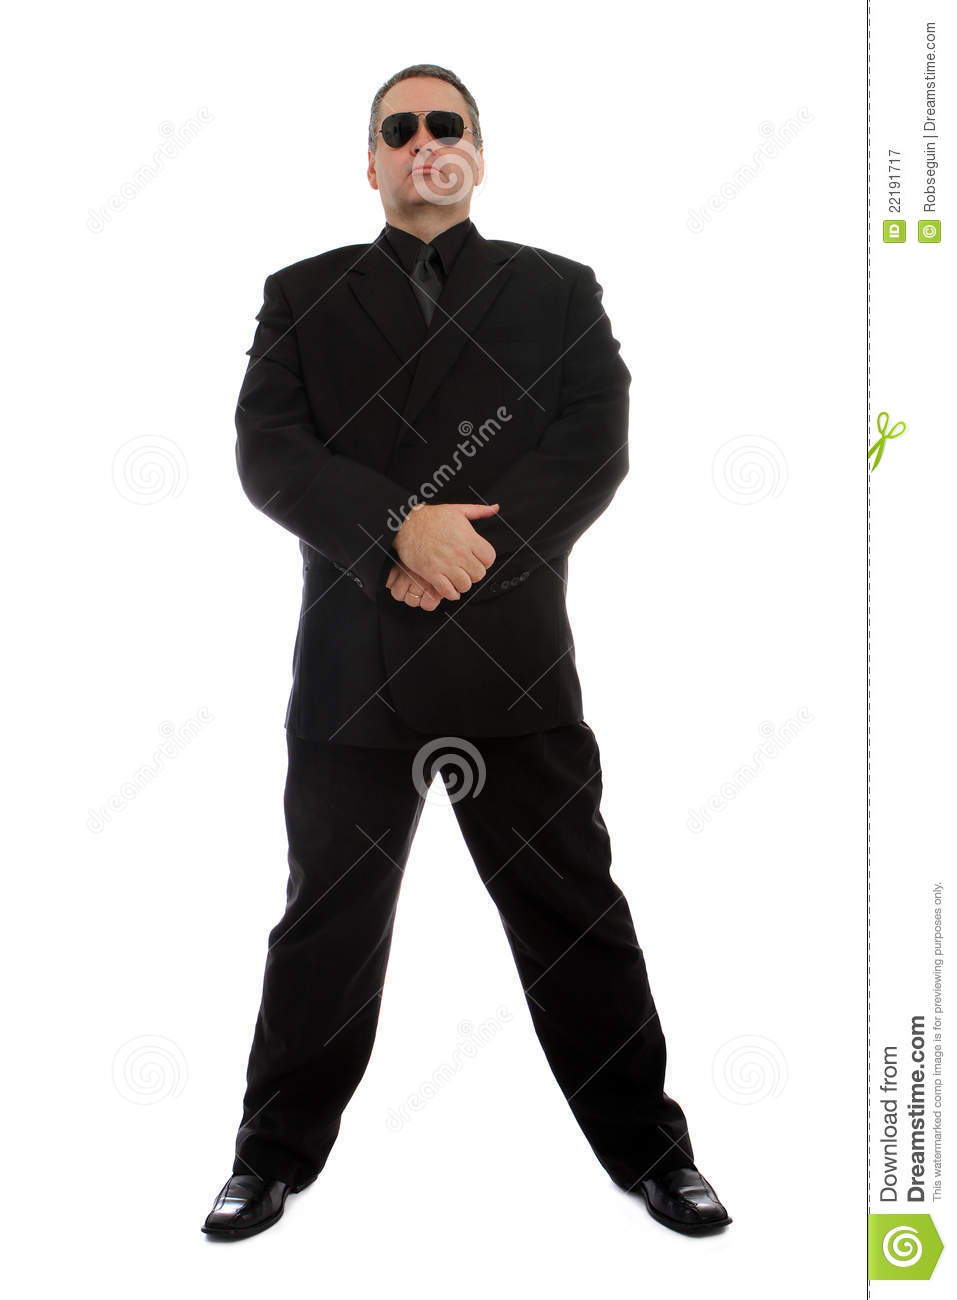 Man In Black Suit Royalty Free Stock Photography   Image  22191717